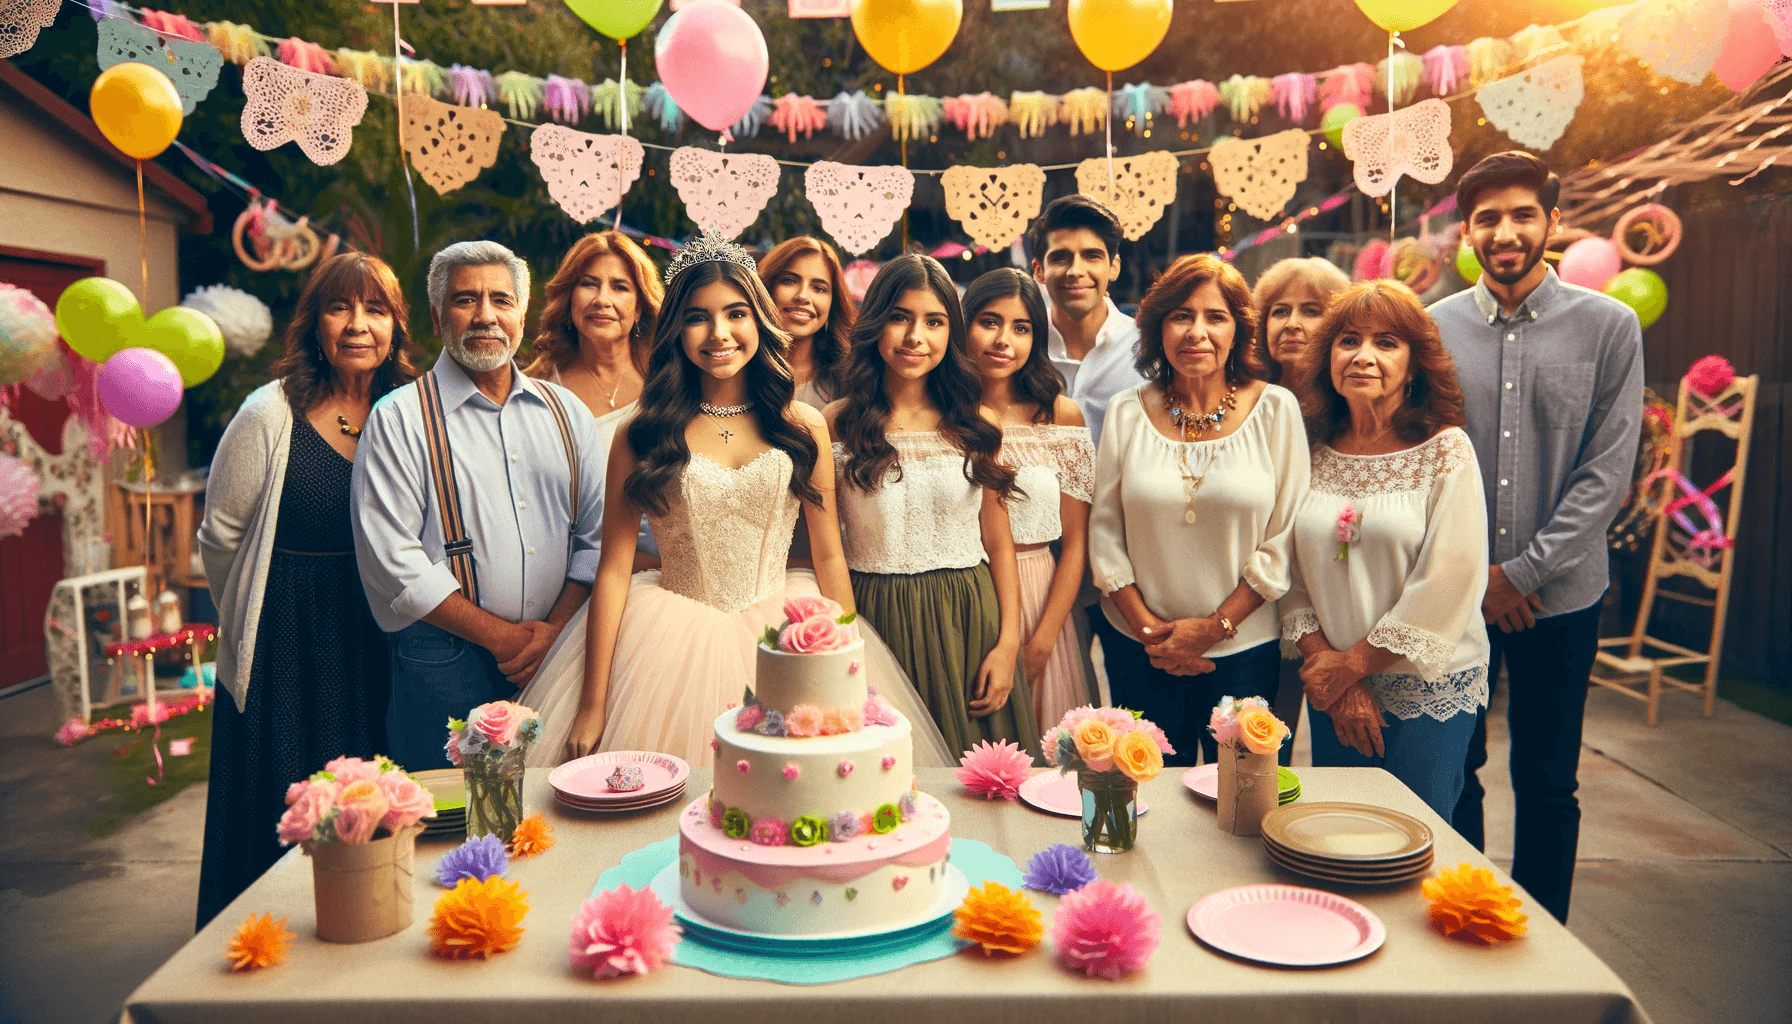 Quinceanera cake decorating: a group of people standing around a table with a Quinceanera cake